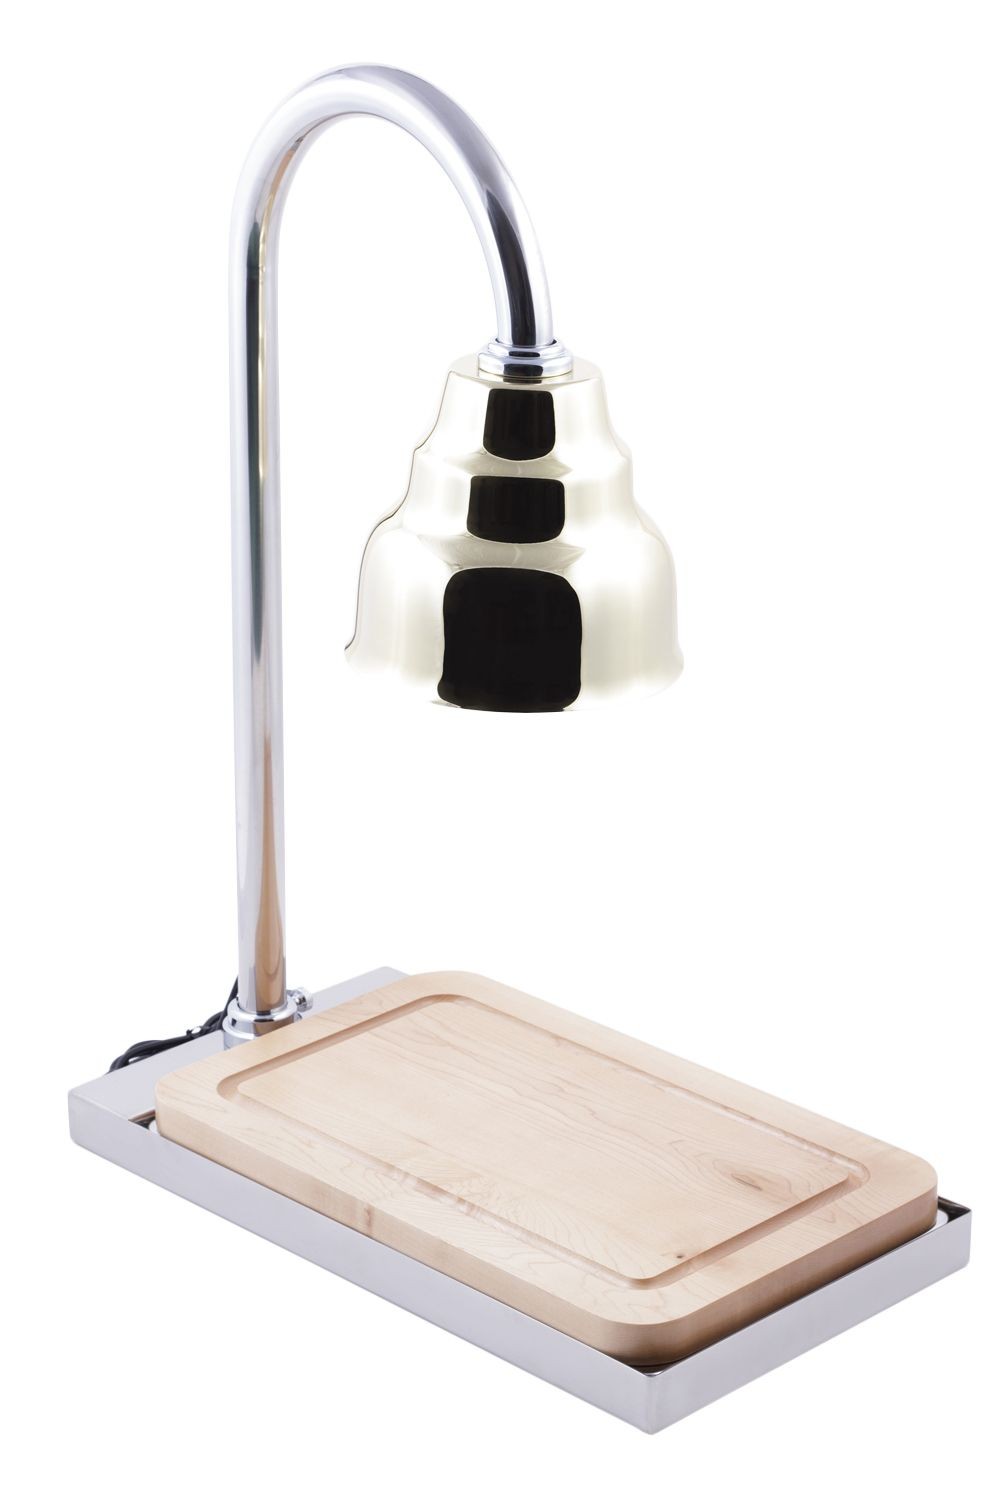 Bon Chef 9698 Carving Station with Butcher Block Board, Brass Shade 21" x 13"